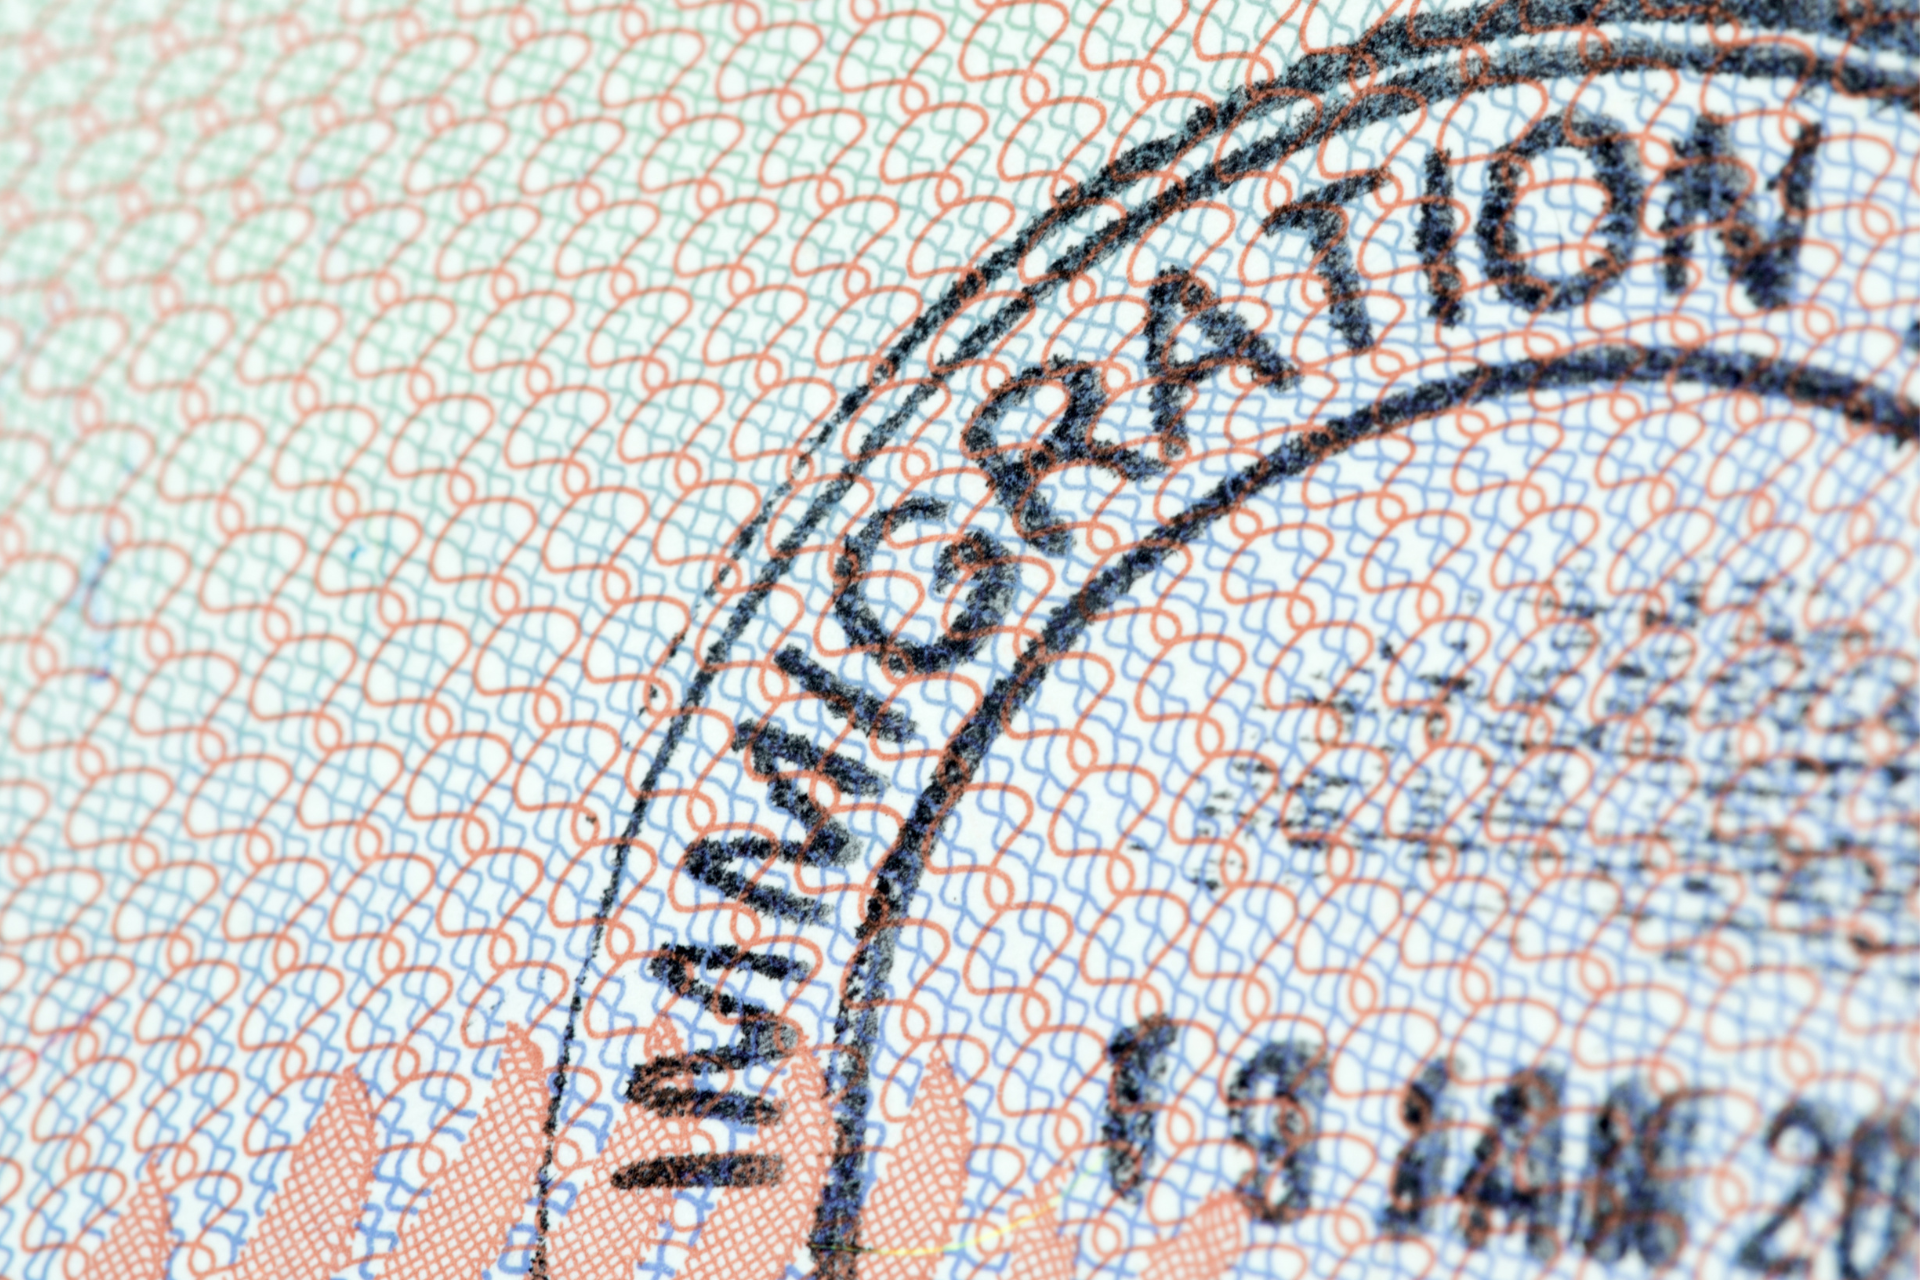 Important U.S. Immigration Updates: Expansion of EAD; Form I-539 Biometrics Exemption; Visa-Free Travel to U.S. from Israel.